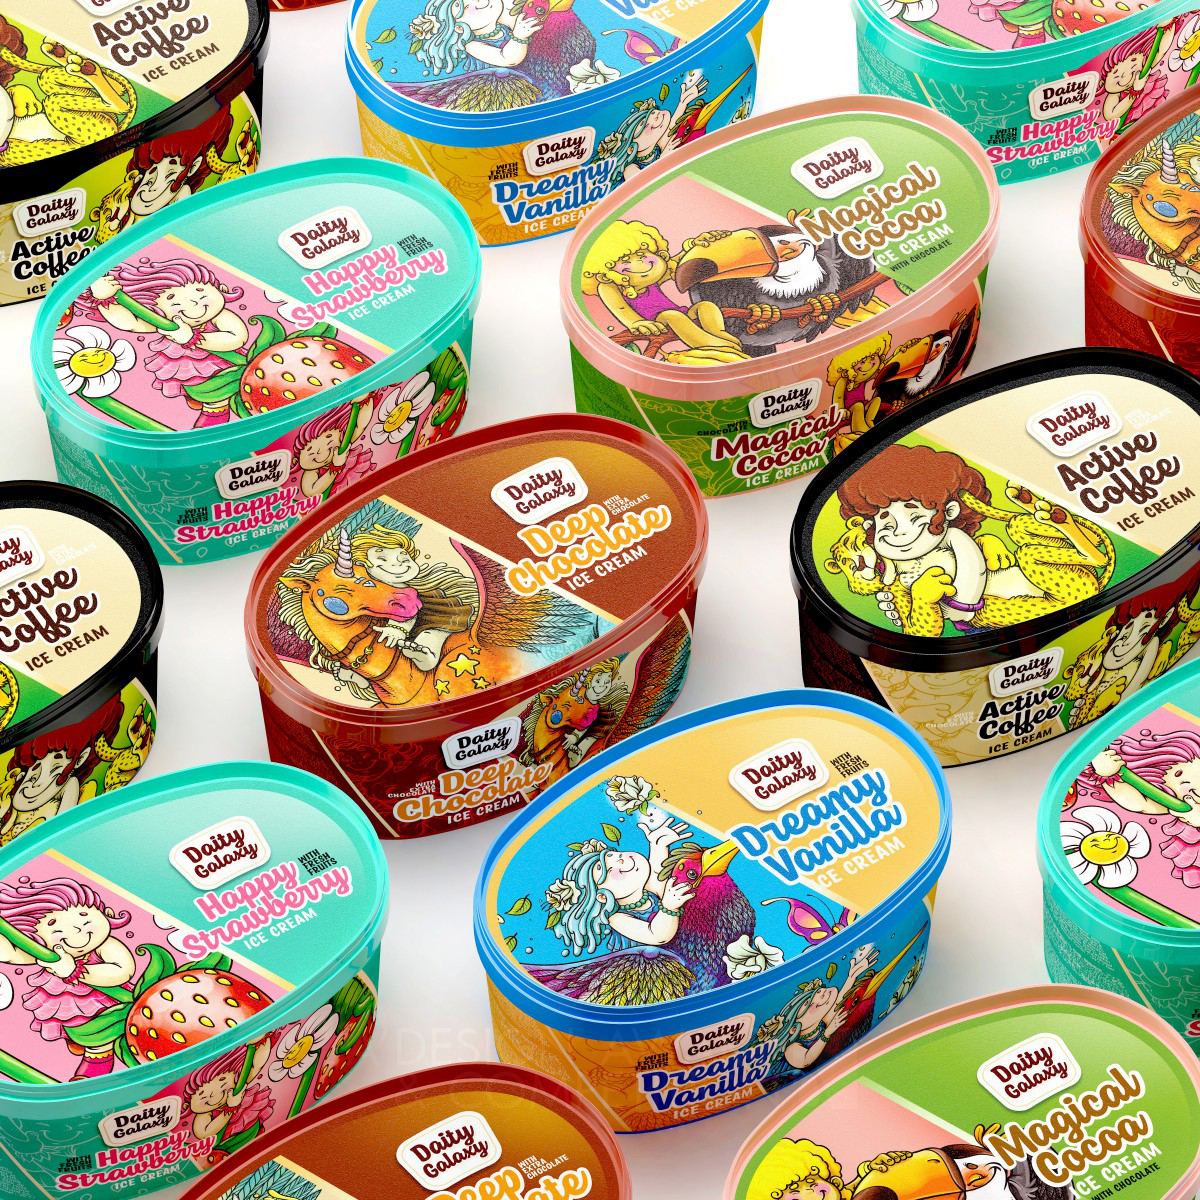 Mohsen Koofiani wins Bronze at the prestigious A' Packaging Design Award with Daity Galaxy Ice Cream Packaging.